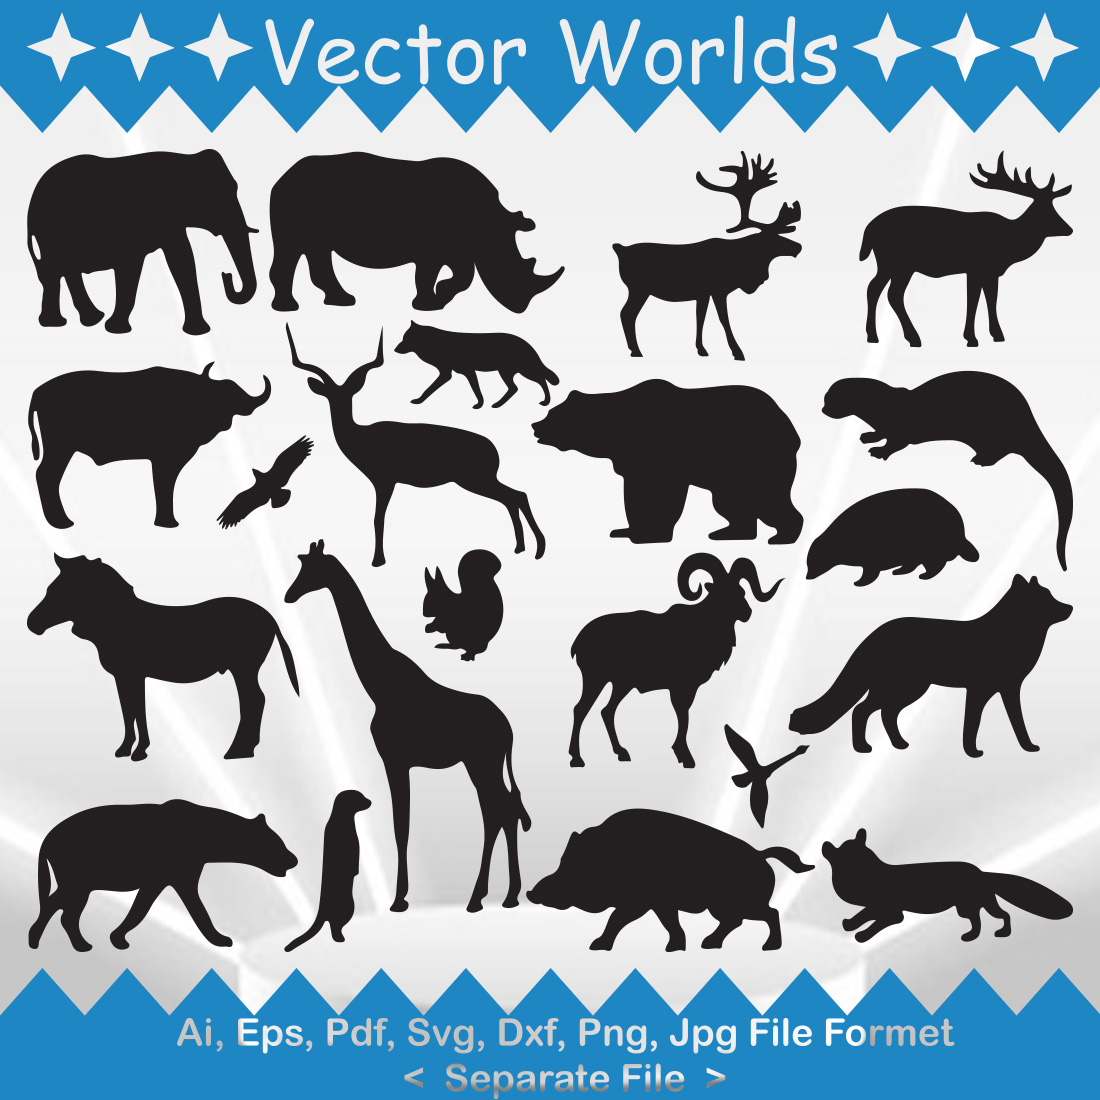 Hunting Animal SVG Vector Design cover image.